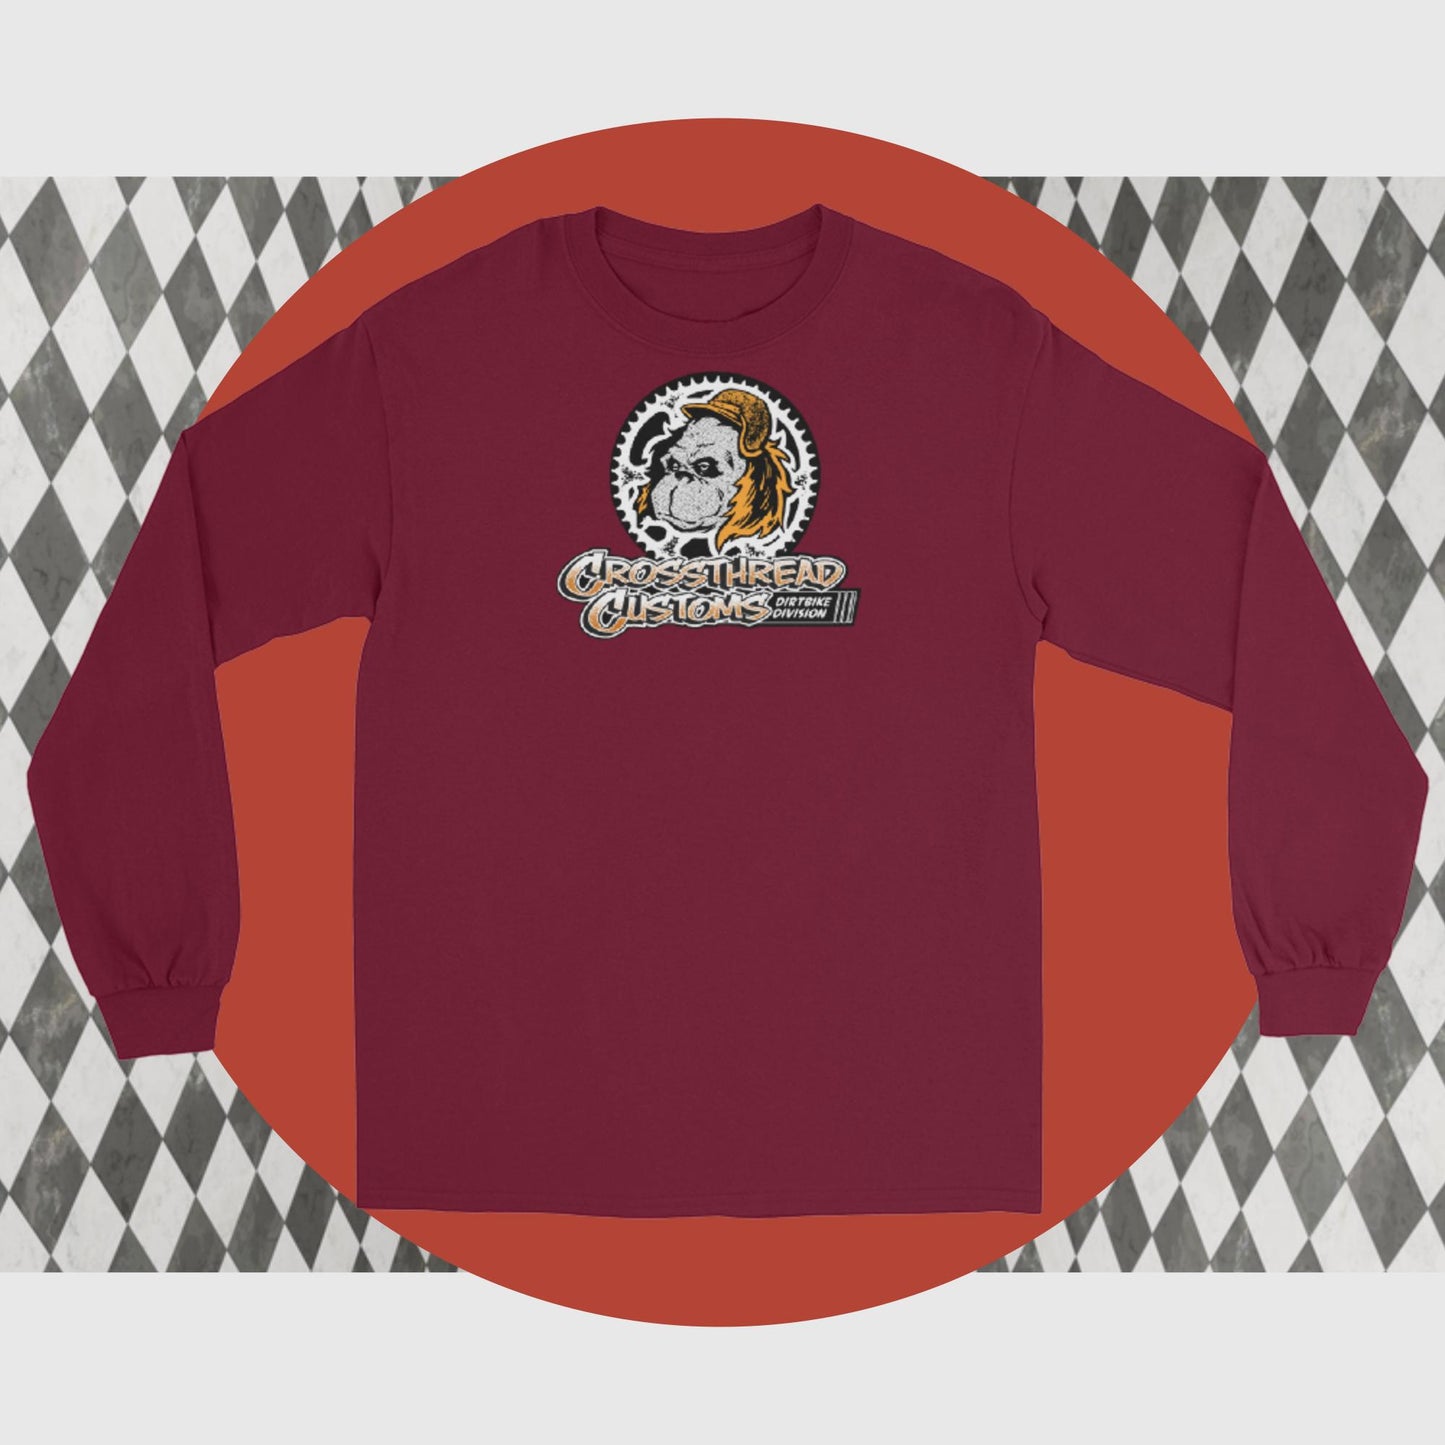 A CrossThread Customs DirtBike Division long sleeves shirts